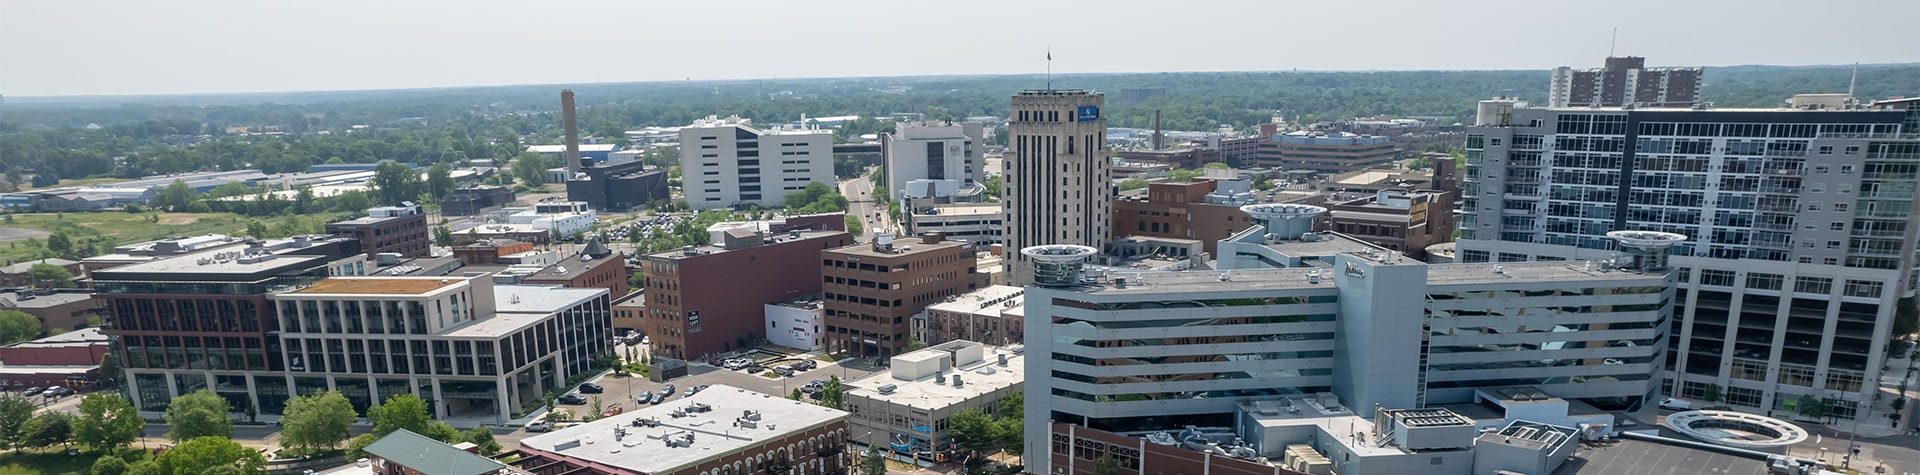 An aerial image of the city of Kalamazoo, with the exchange building, the Radisson hotel, and the Fifth Third Bank building all in view.